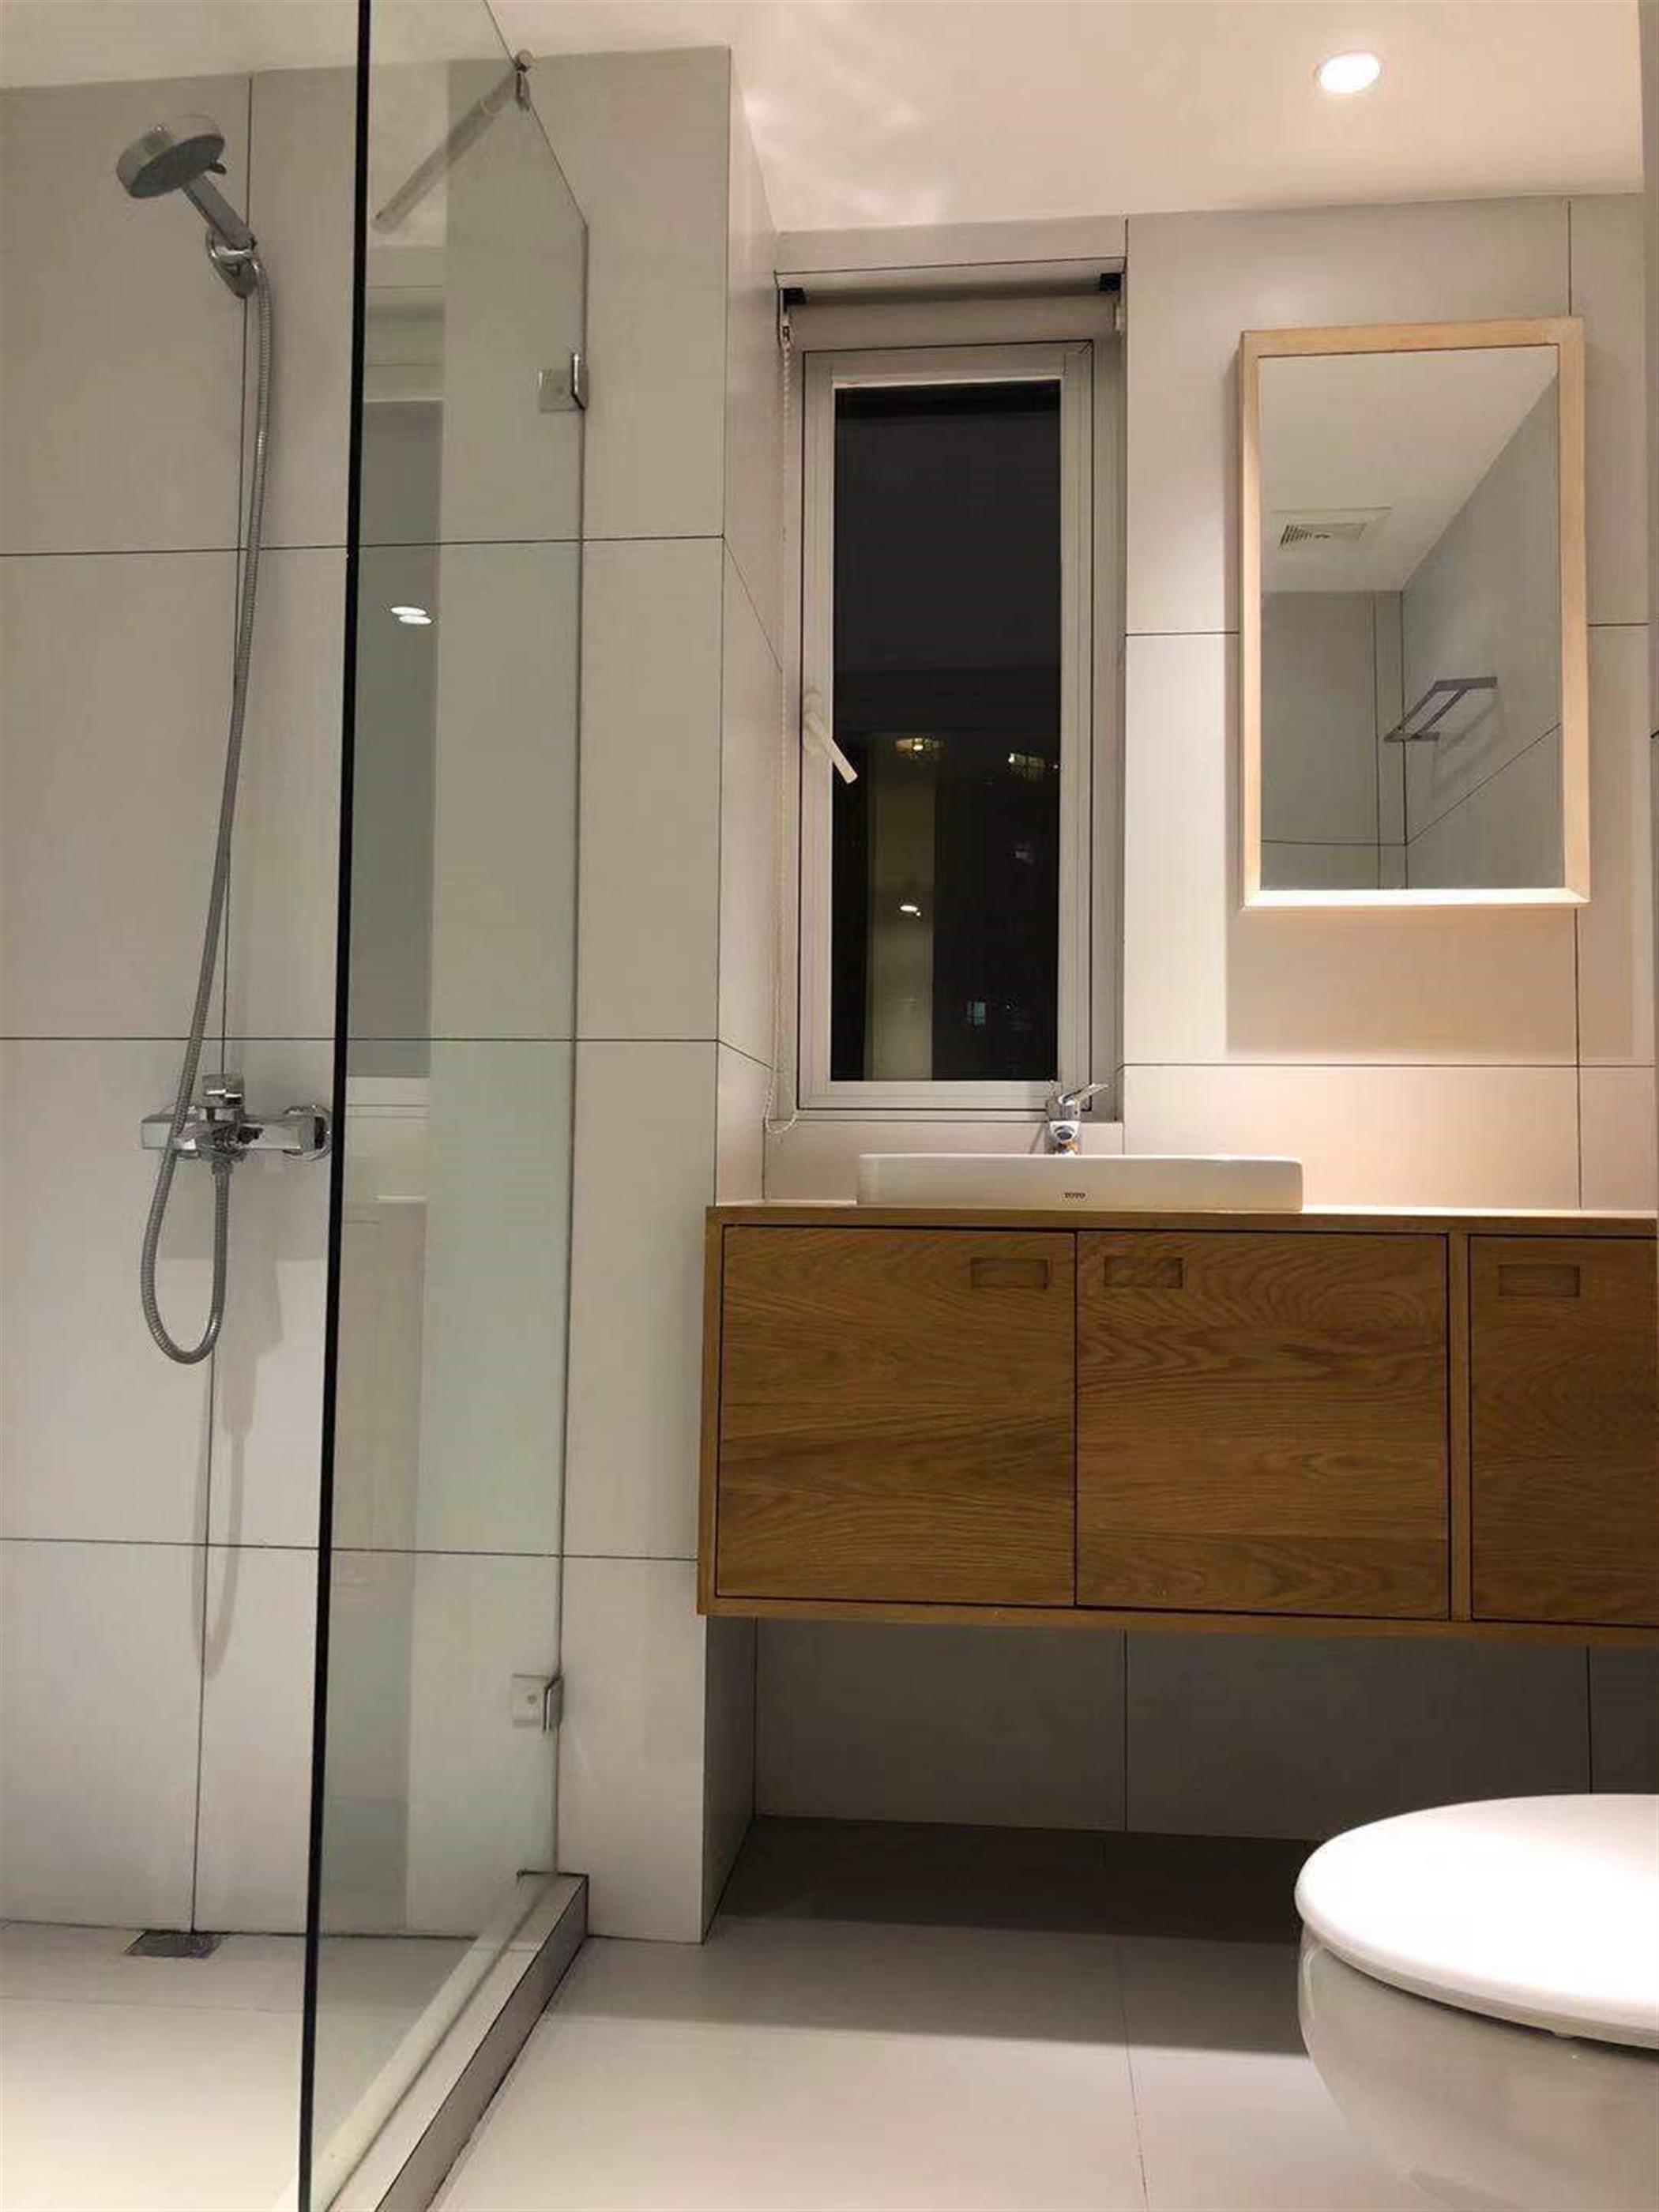 clean bathroom Newly Decorated High-Quality 3BR Apt nr LN 2/11 in Shanghai’s Deluxe Courtyards Compound for Rent